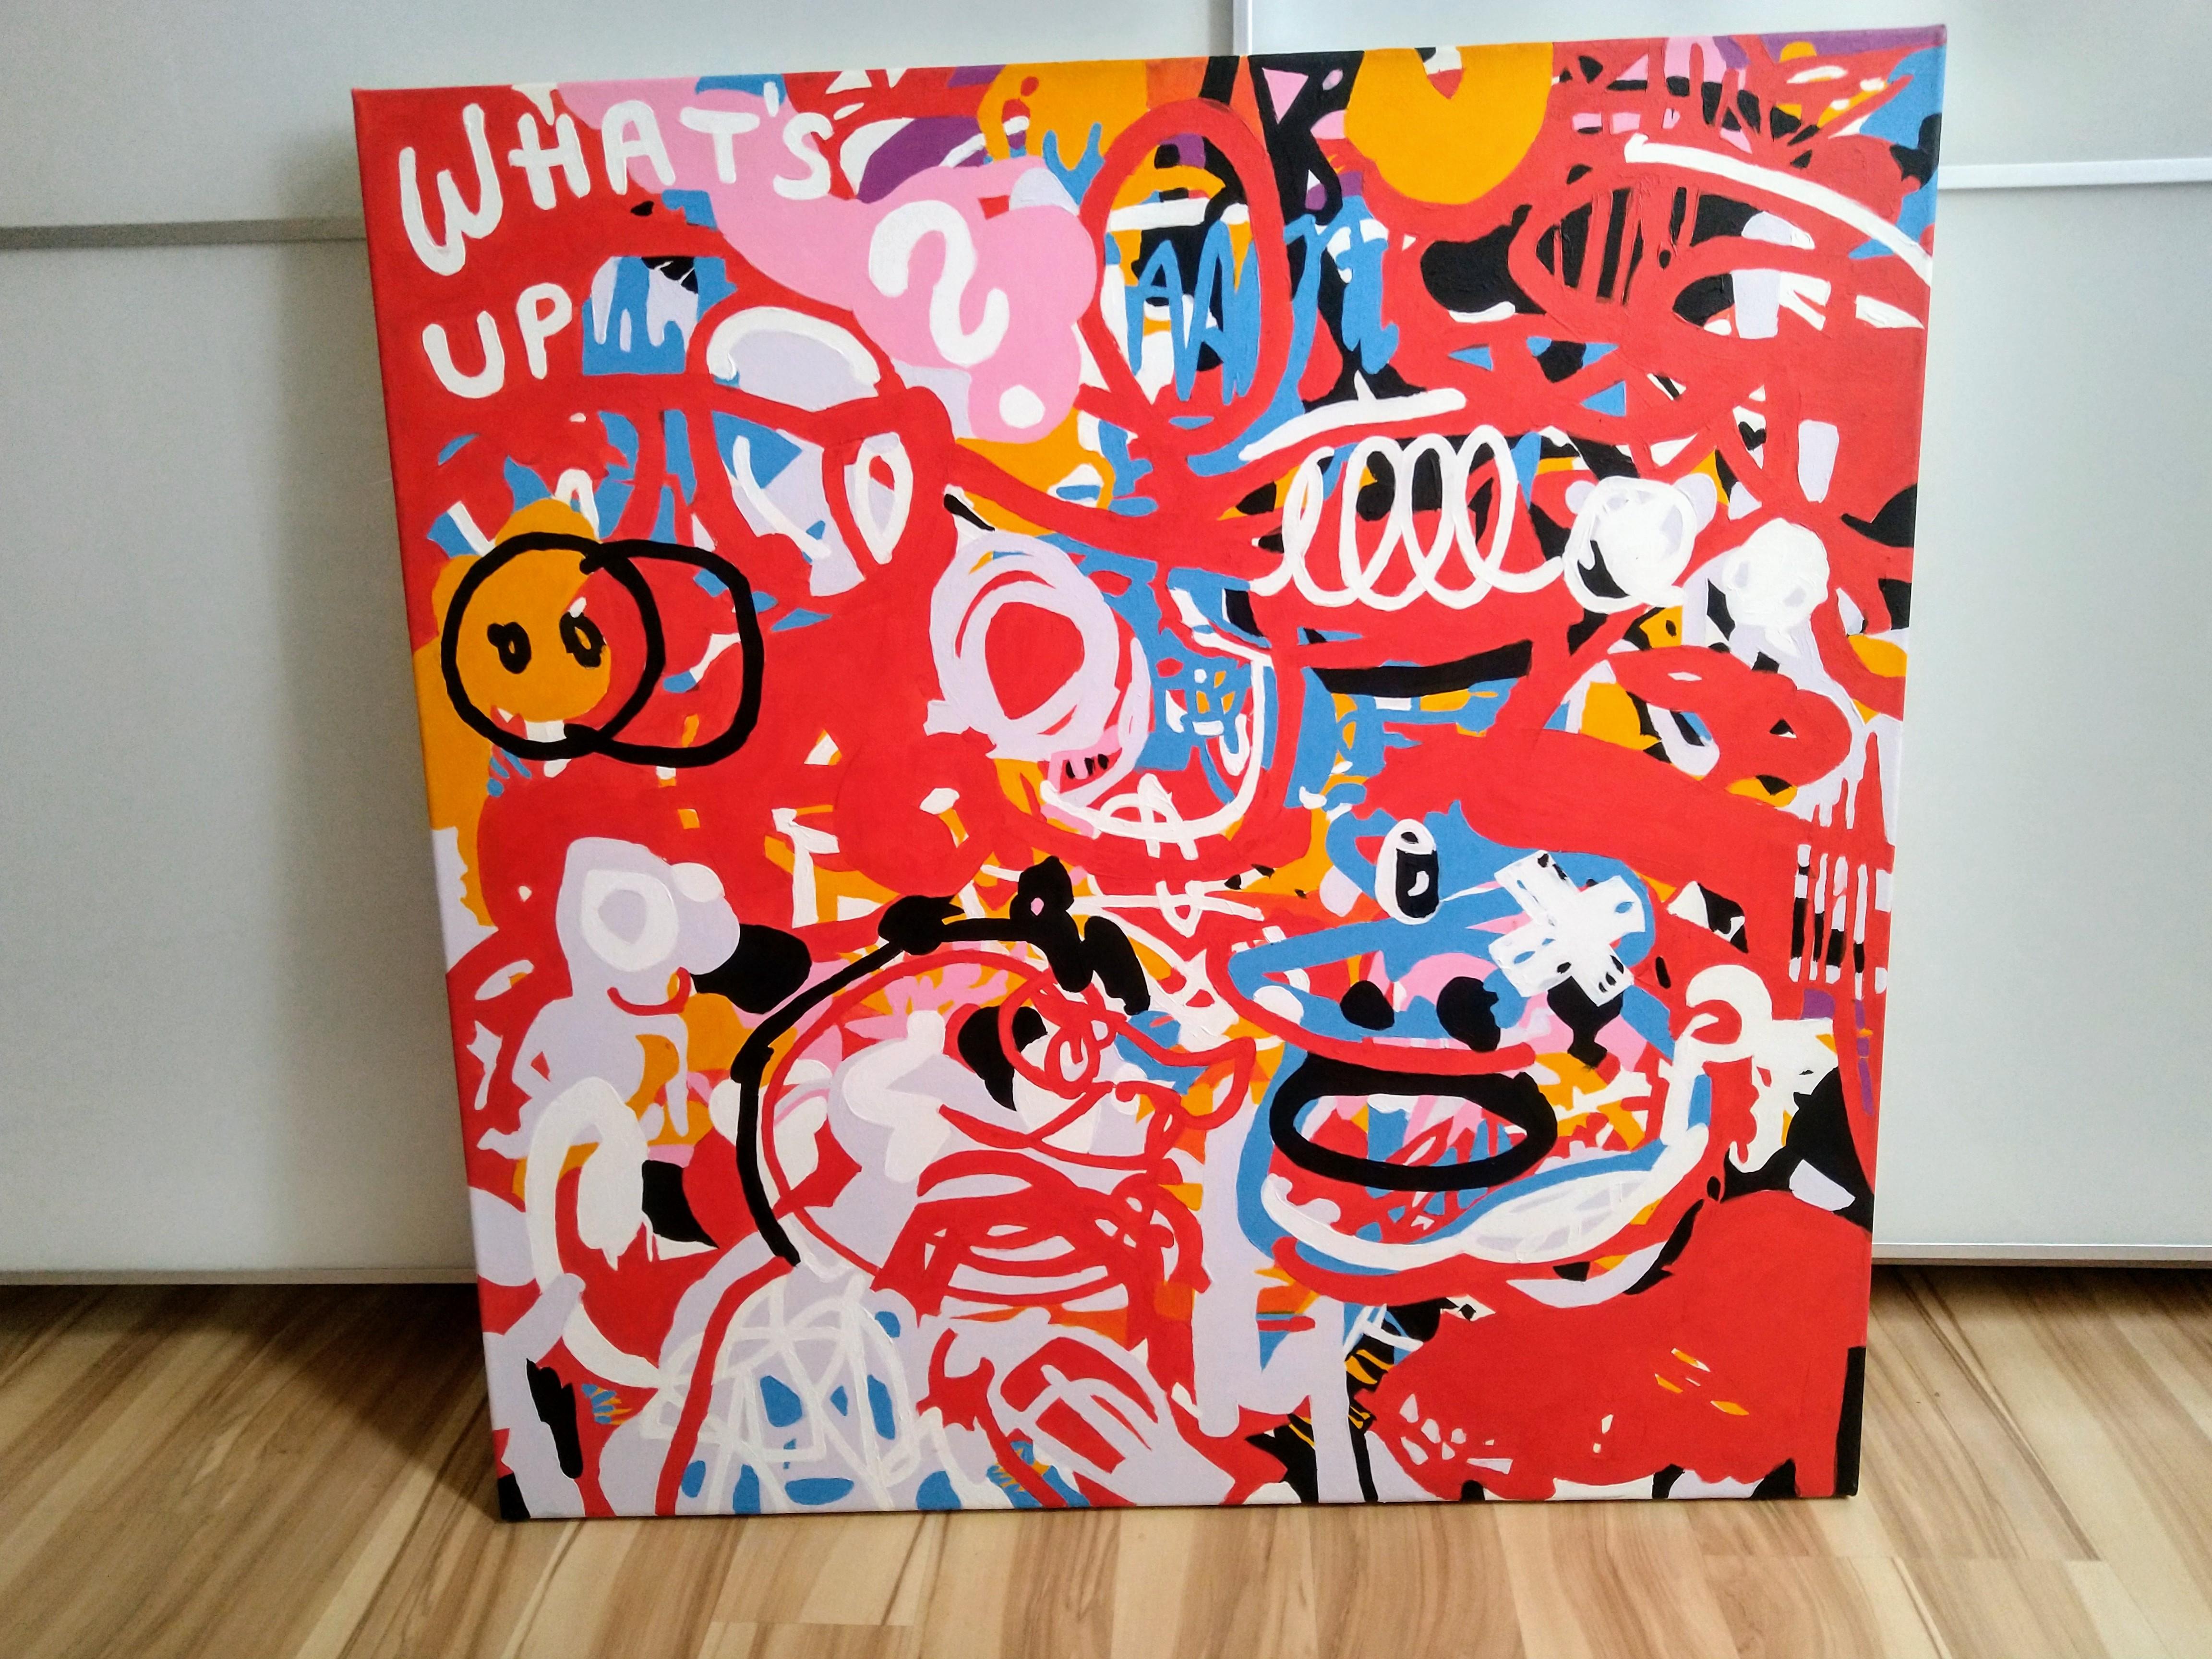 Whats Up II  - Abstraction, Expression, Pop, Street Art, Energetic, Joyful - Contemporary Painting by Paweł Myszka